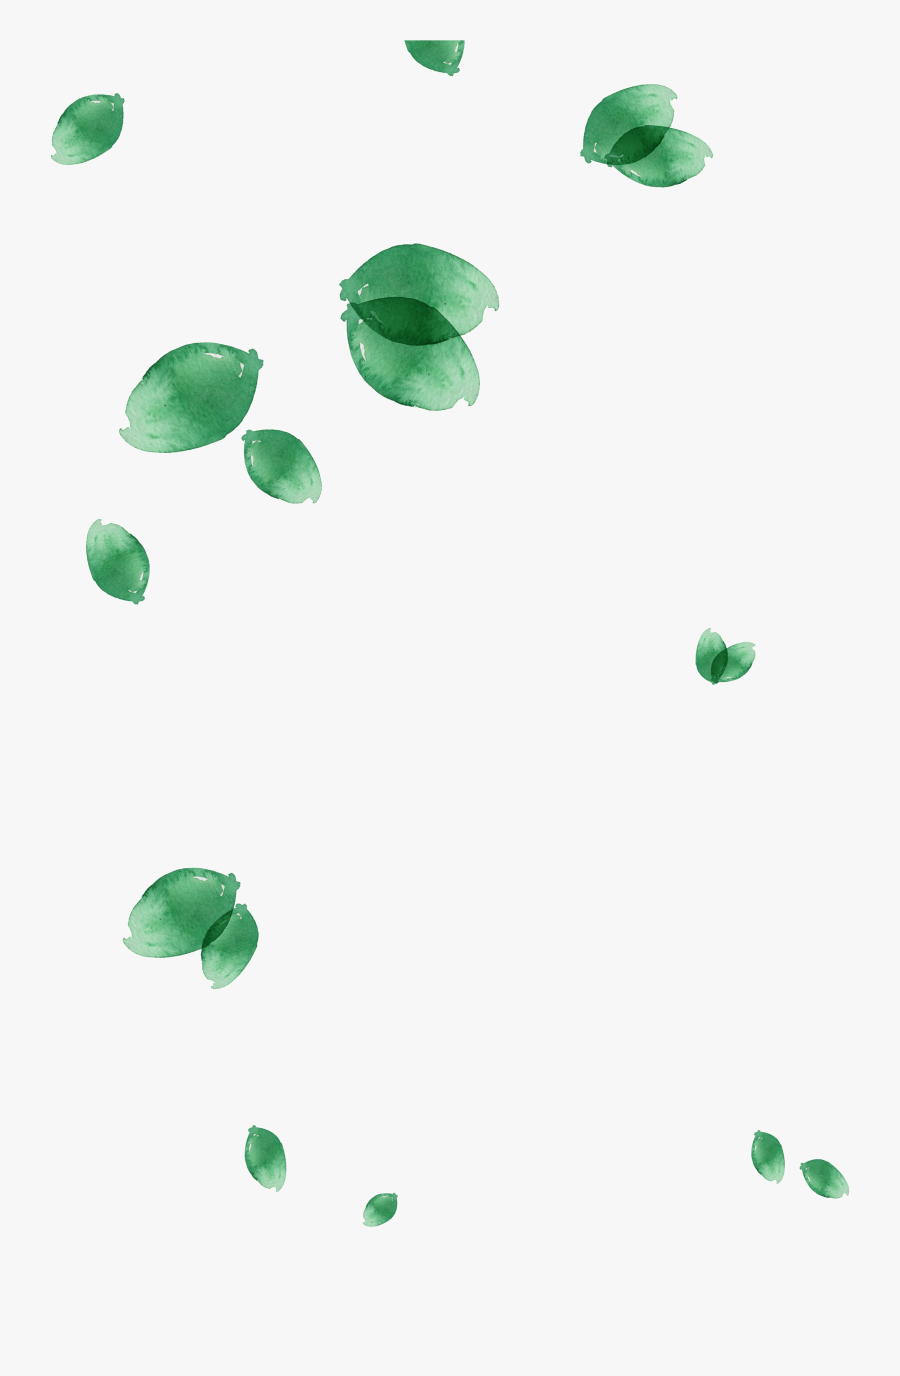 Leaf Watercolor Painting Green - Png Green Leaves Watercolor Leaf, Transparent Clipart